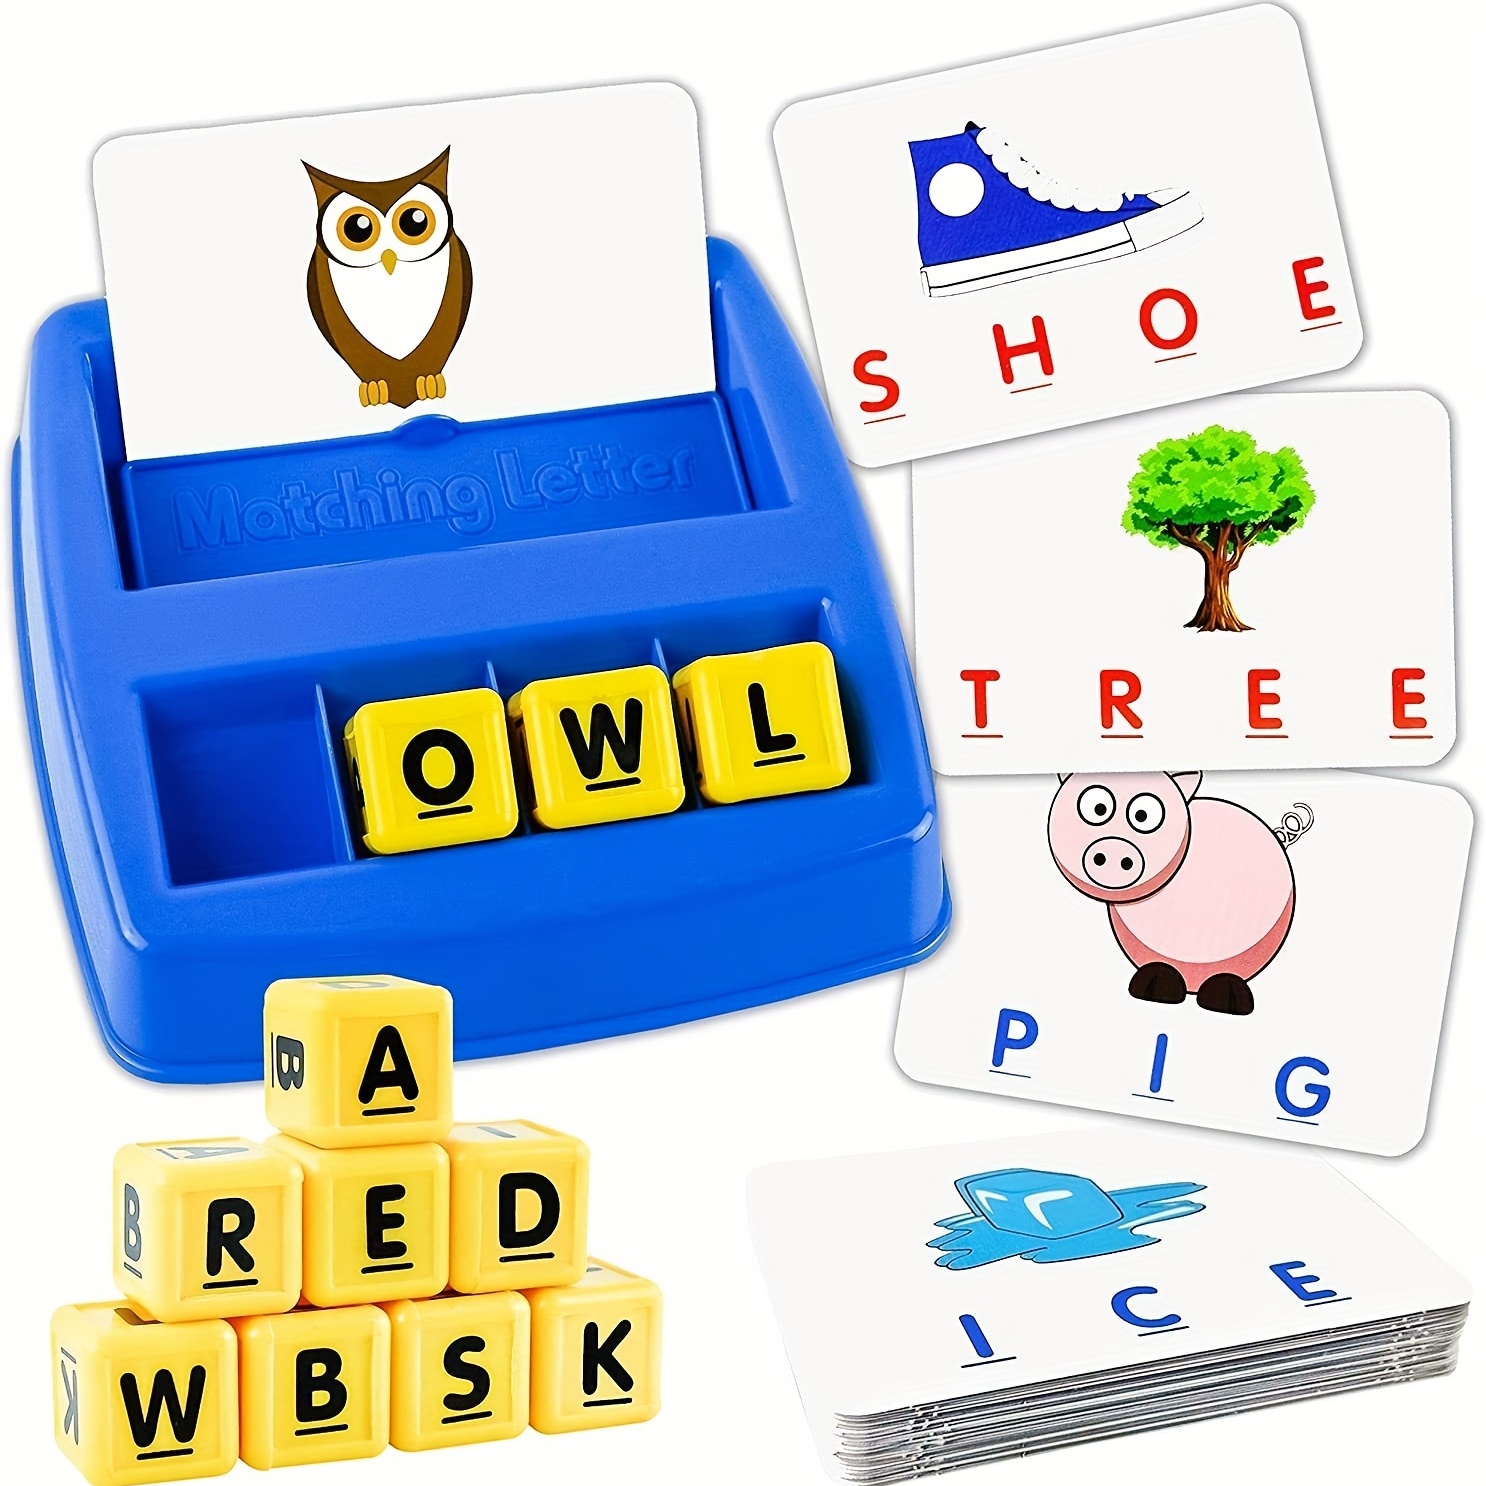 

Educational Toys Gifts, Teaches Word Recognition, Spelling, And Increases Memory, Matching Letter Learning Games Activities, See And Spell Learning Toy, Stem Toys, Halloween, Christmas Gift